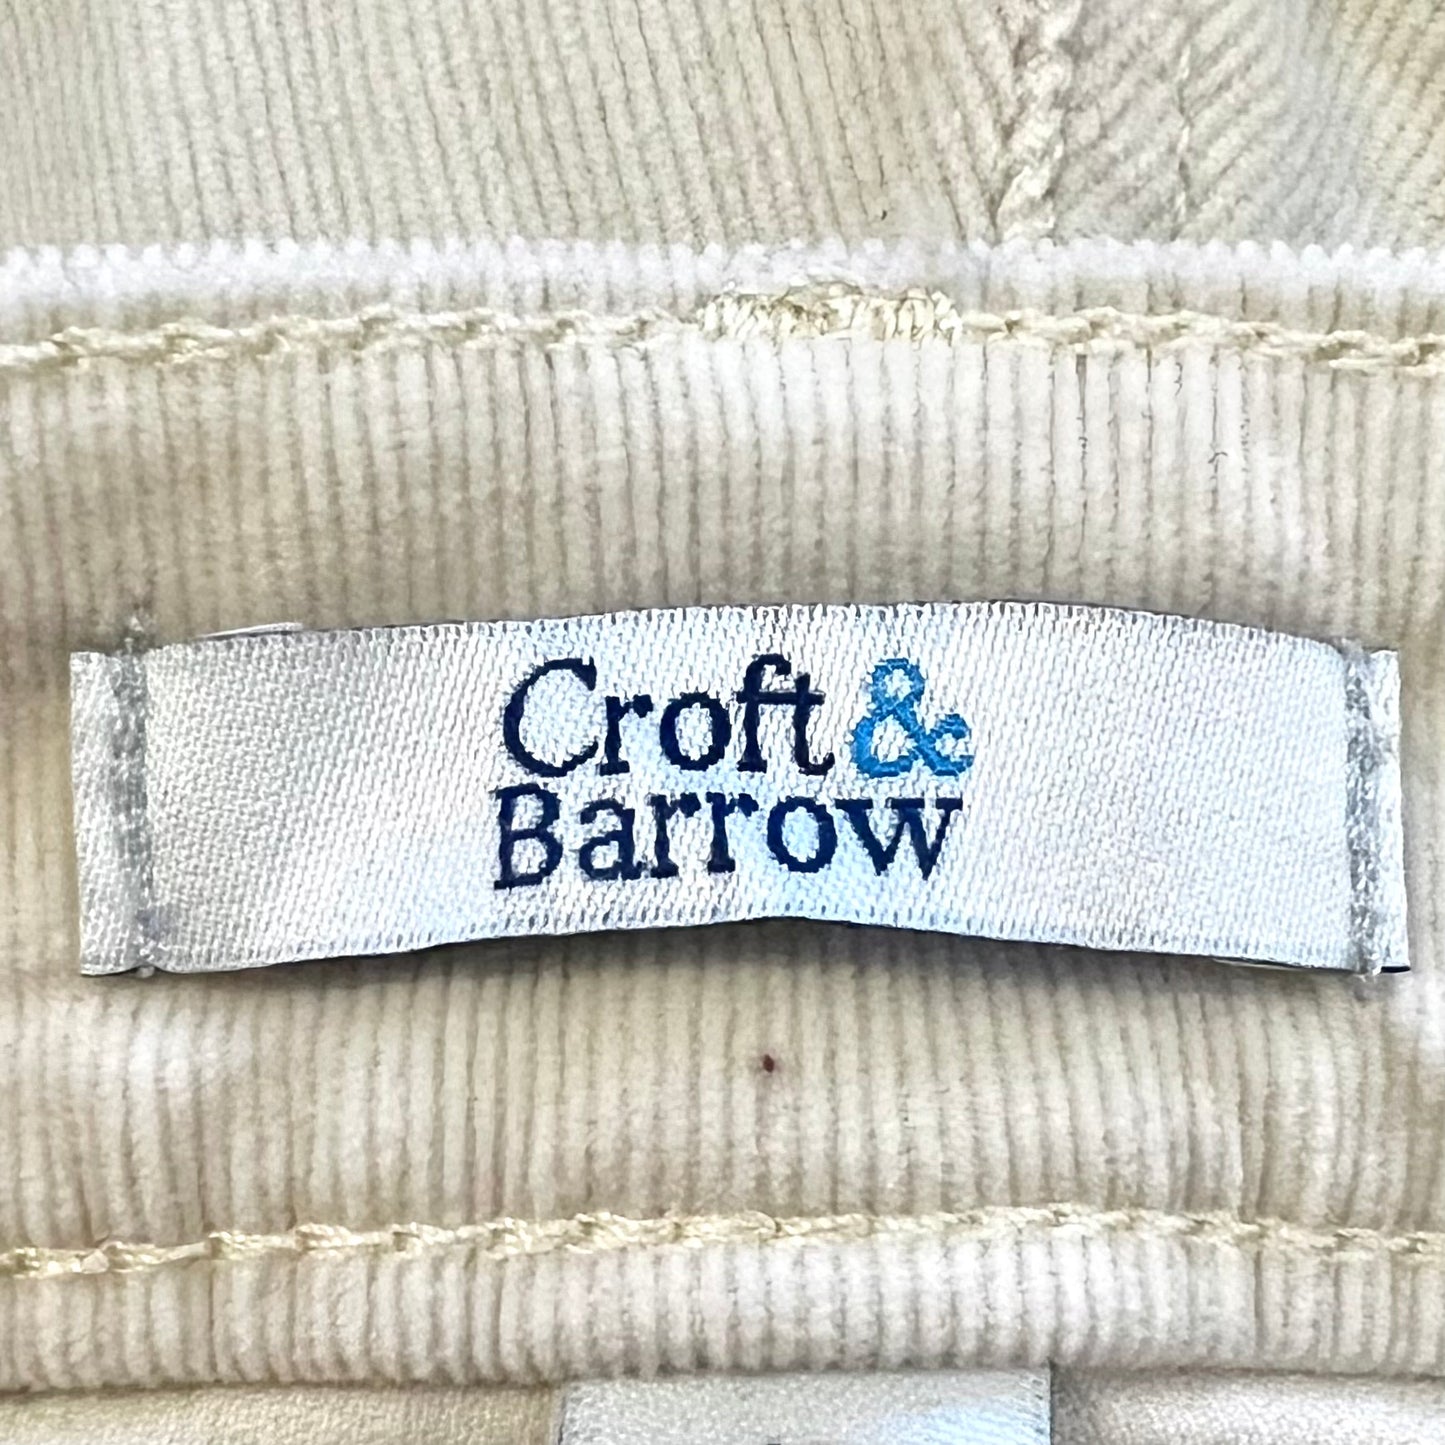 Pants Corduroy By Croft And Barrow  Size: 18